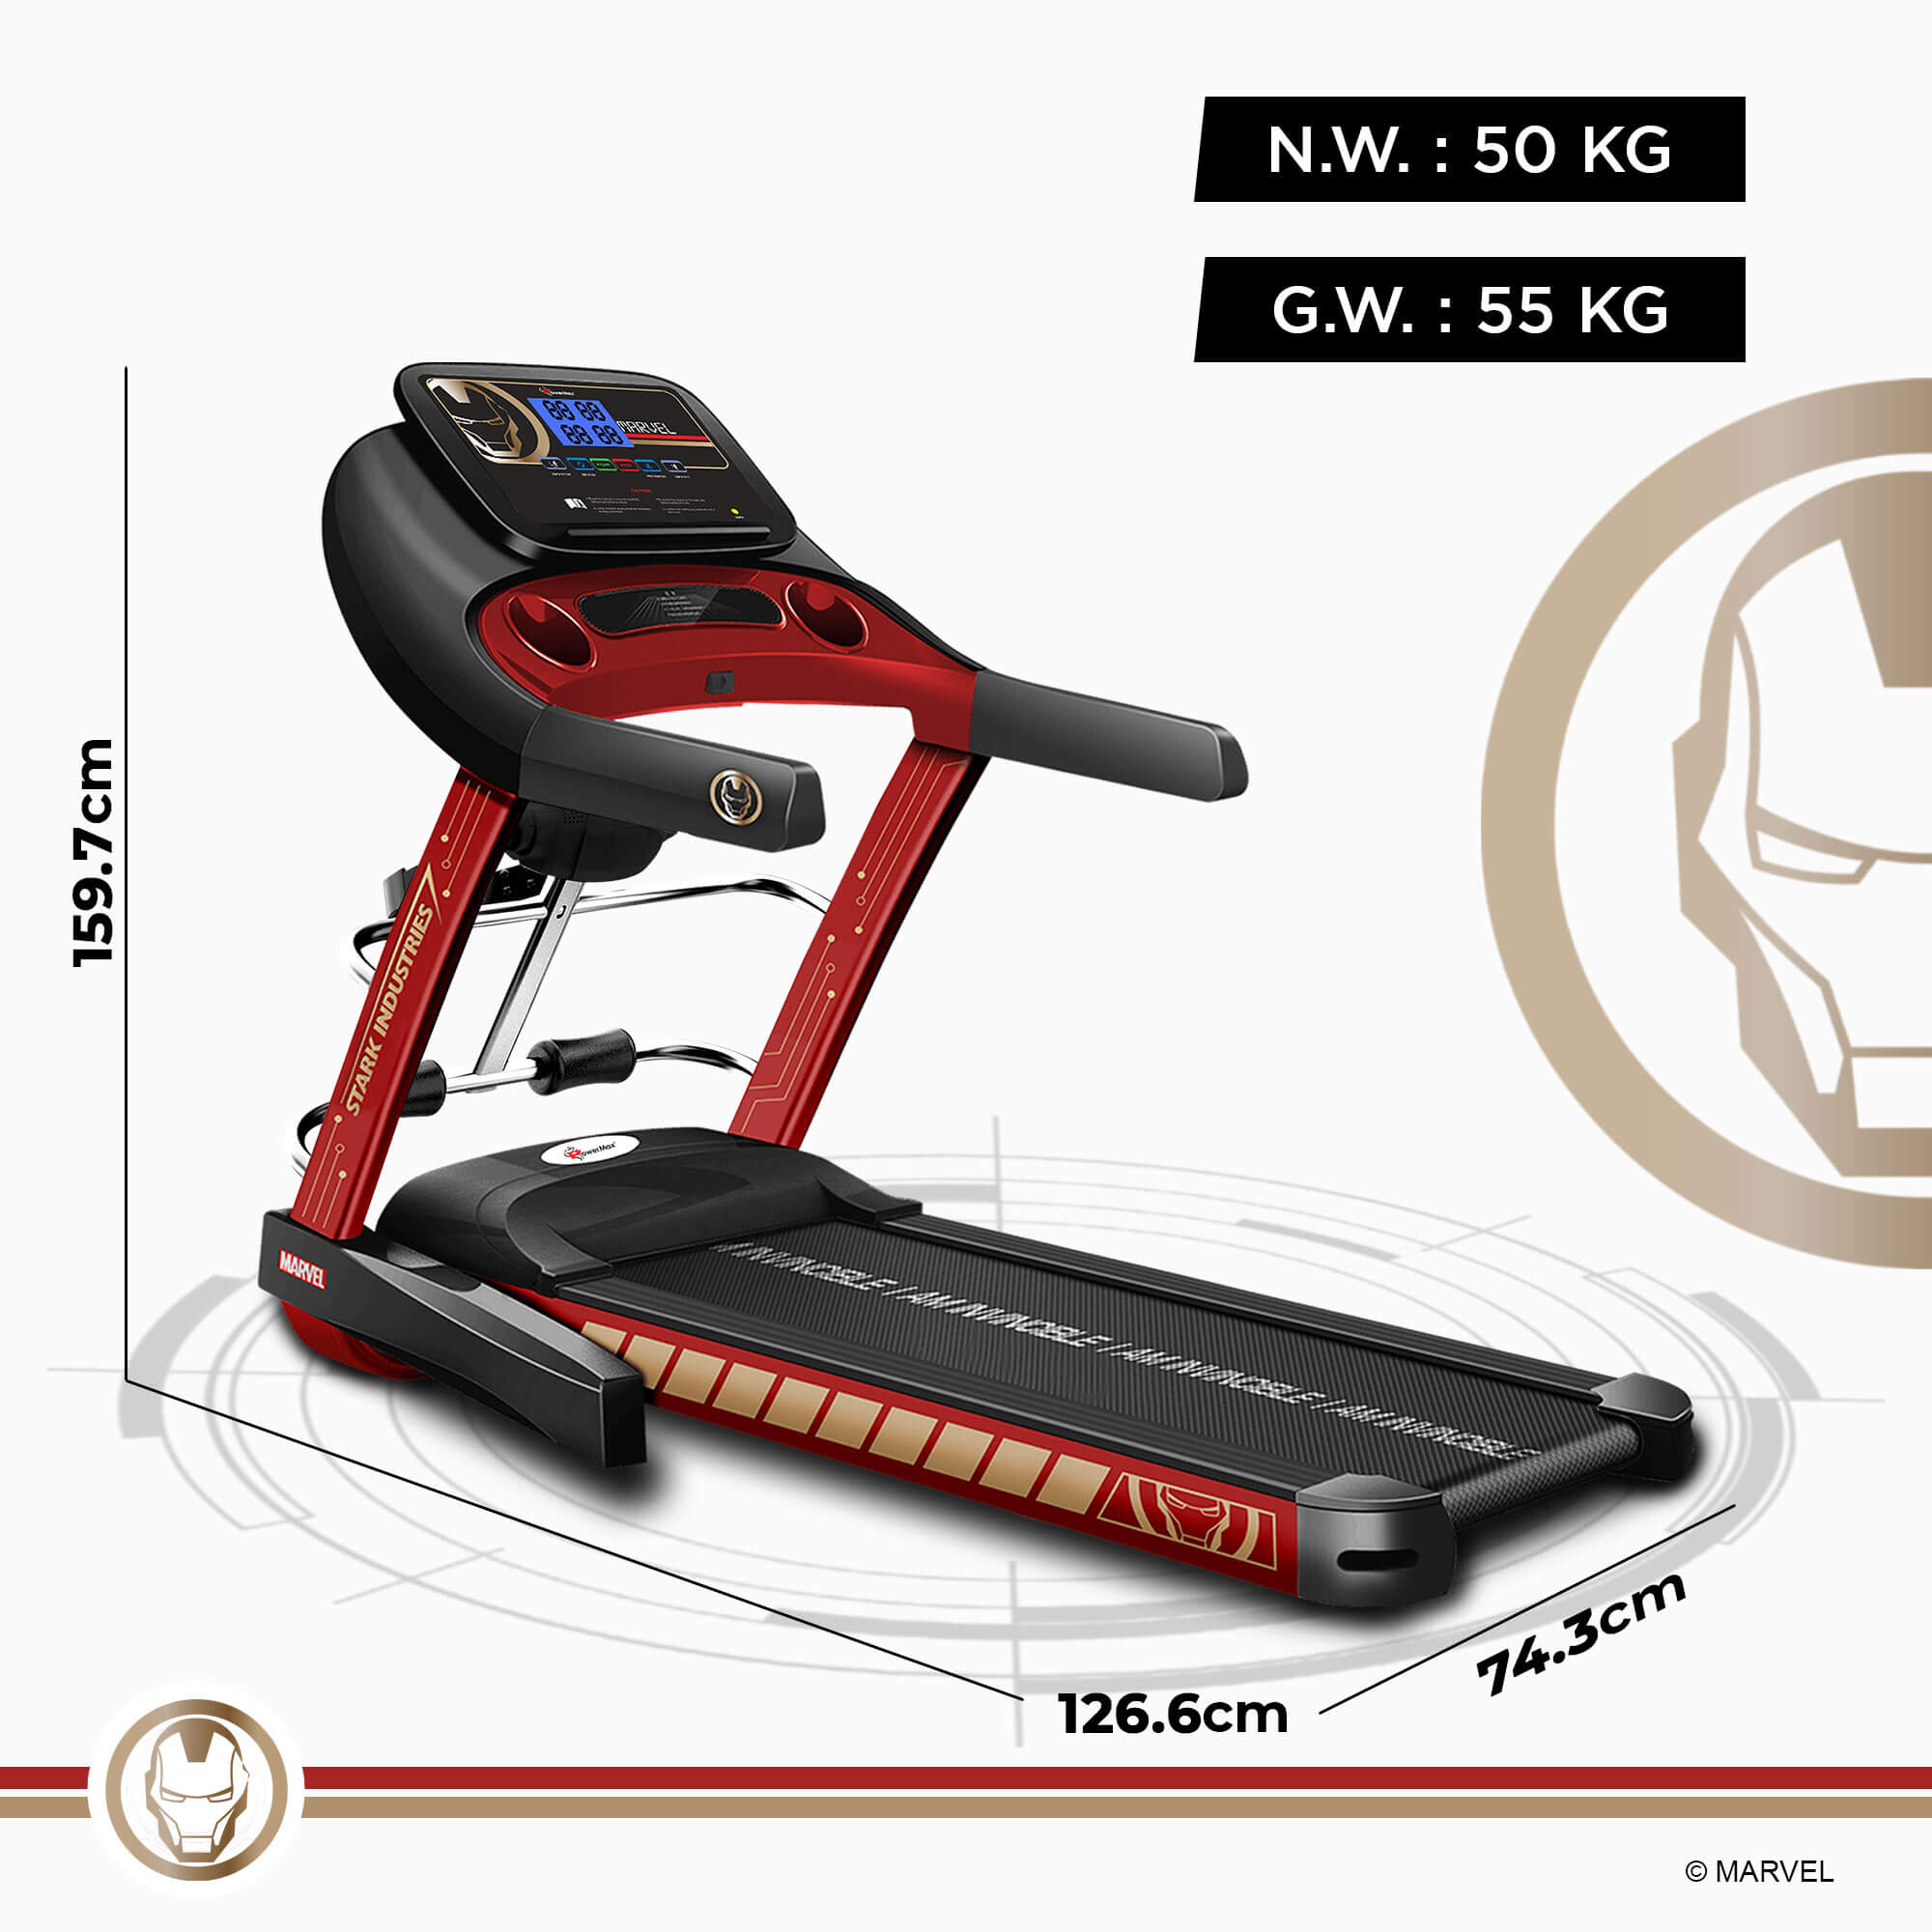 PowerMax X Marvel MT-1M/TD-M1 Motorized Treadmill with Android & iOS Application